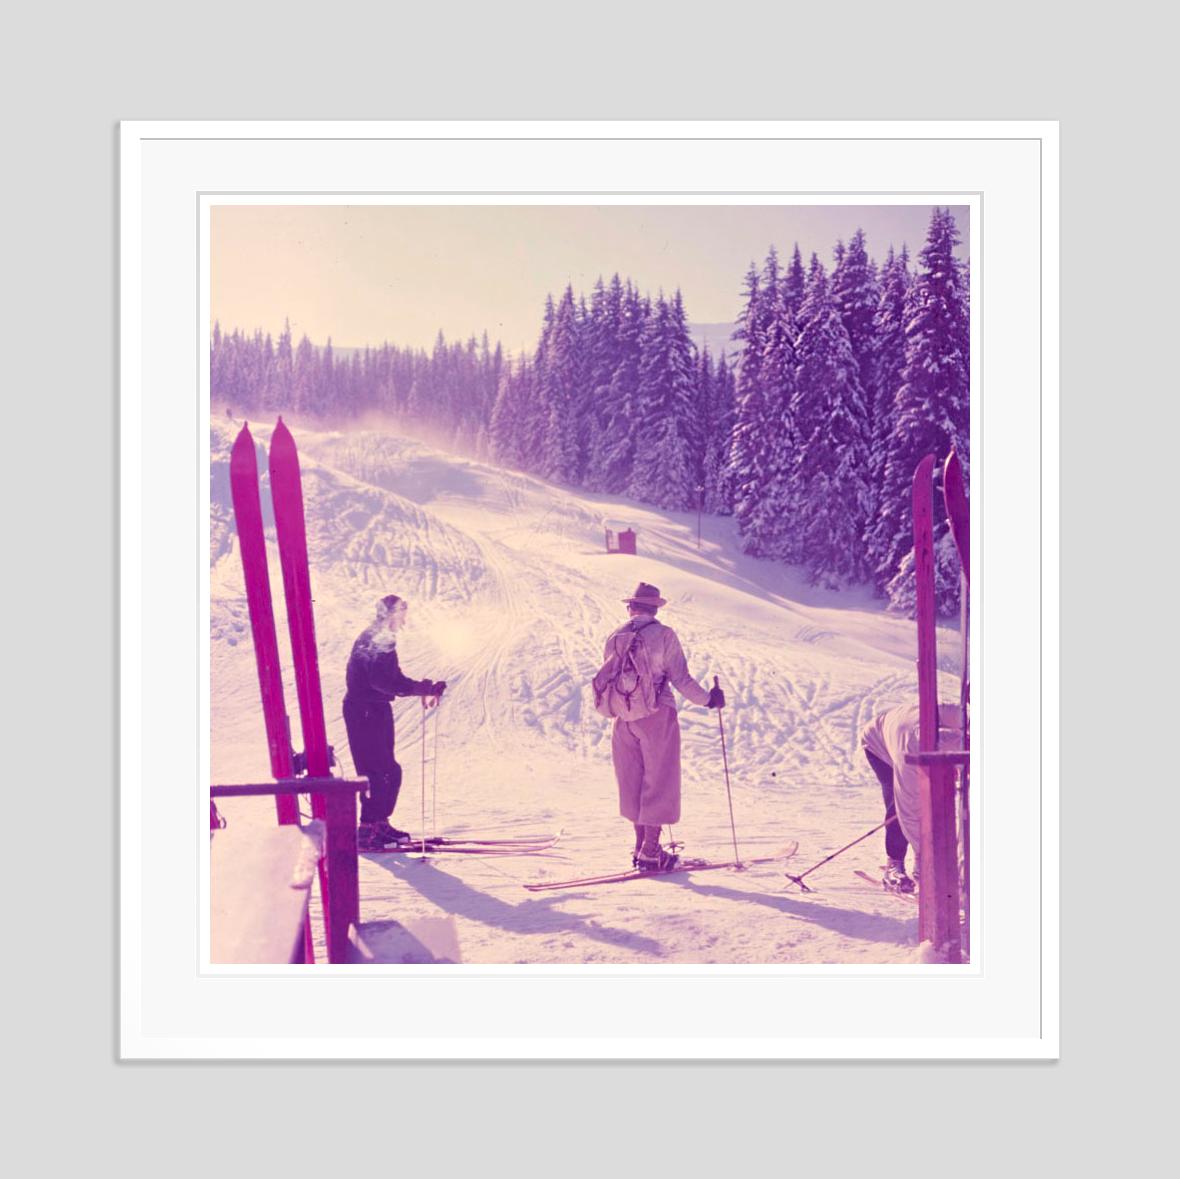 Mountain Top

1954

Two skiers prepare to beging their descent, Klosters, Switzerland, 1954.

by Toni Frissell

30 x 30